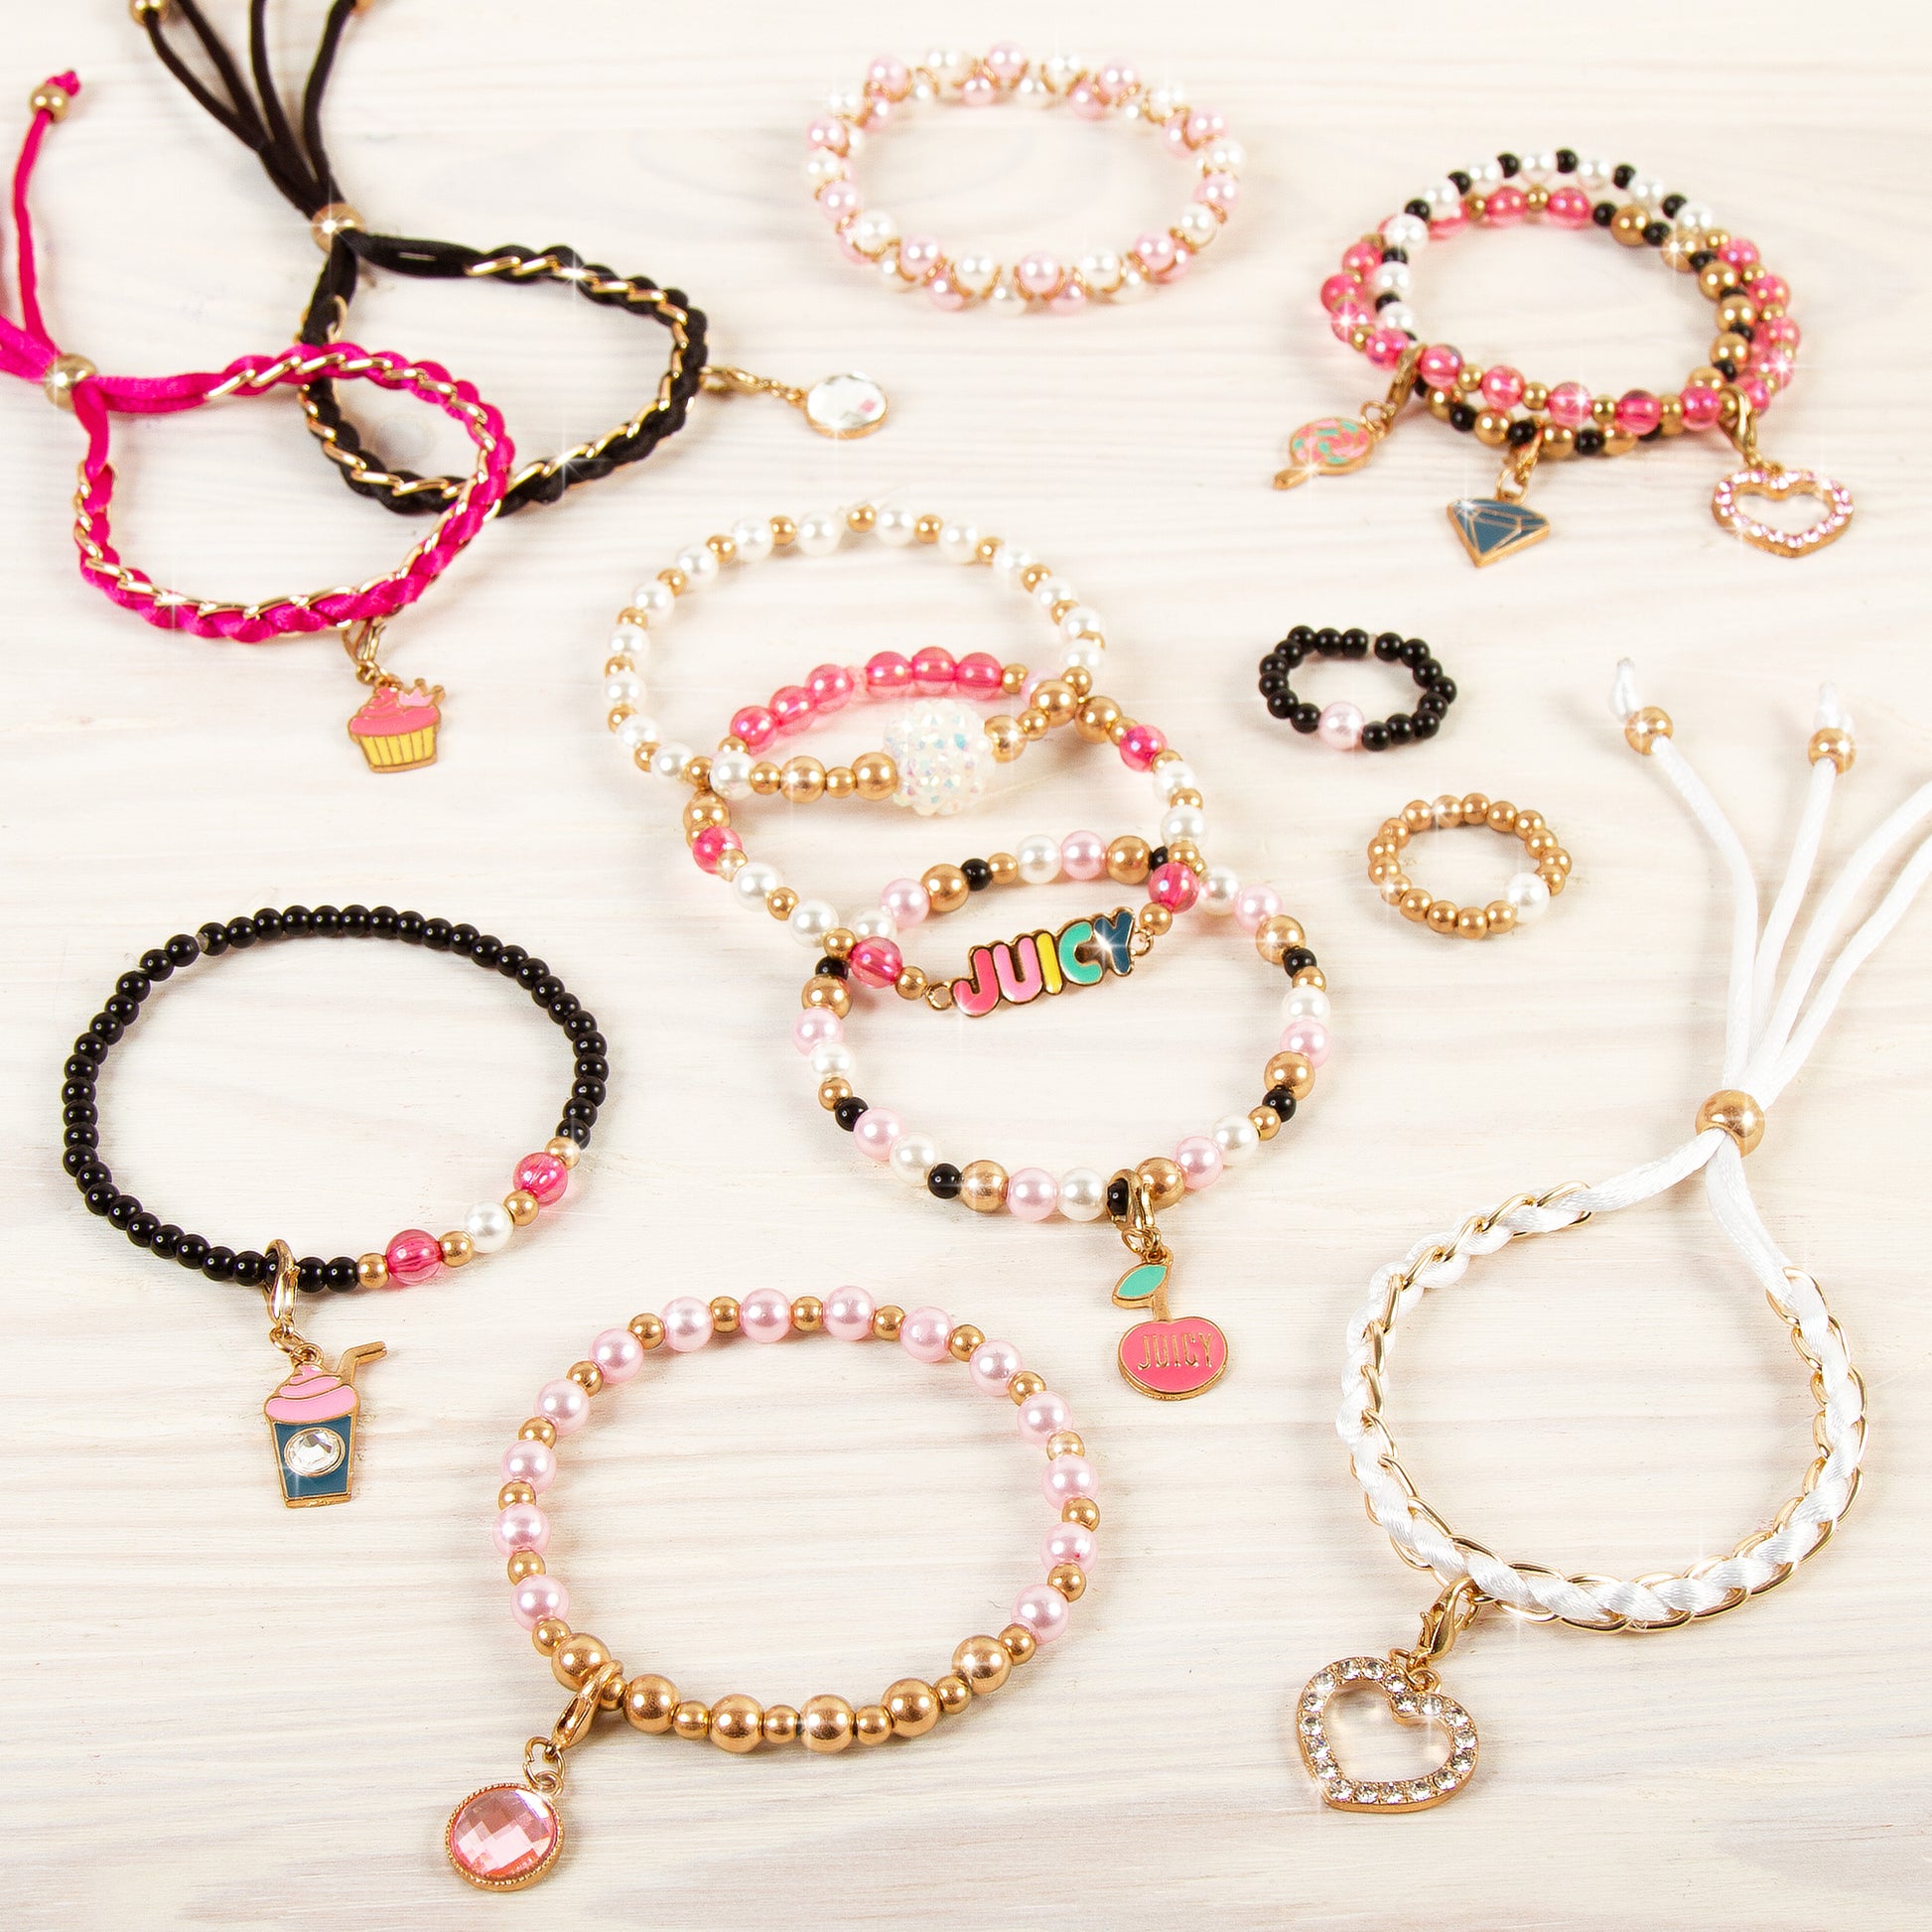 Juicy Couture™ Perfectly Pink Bracelets – Make It Real